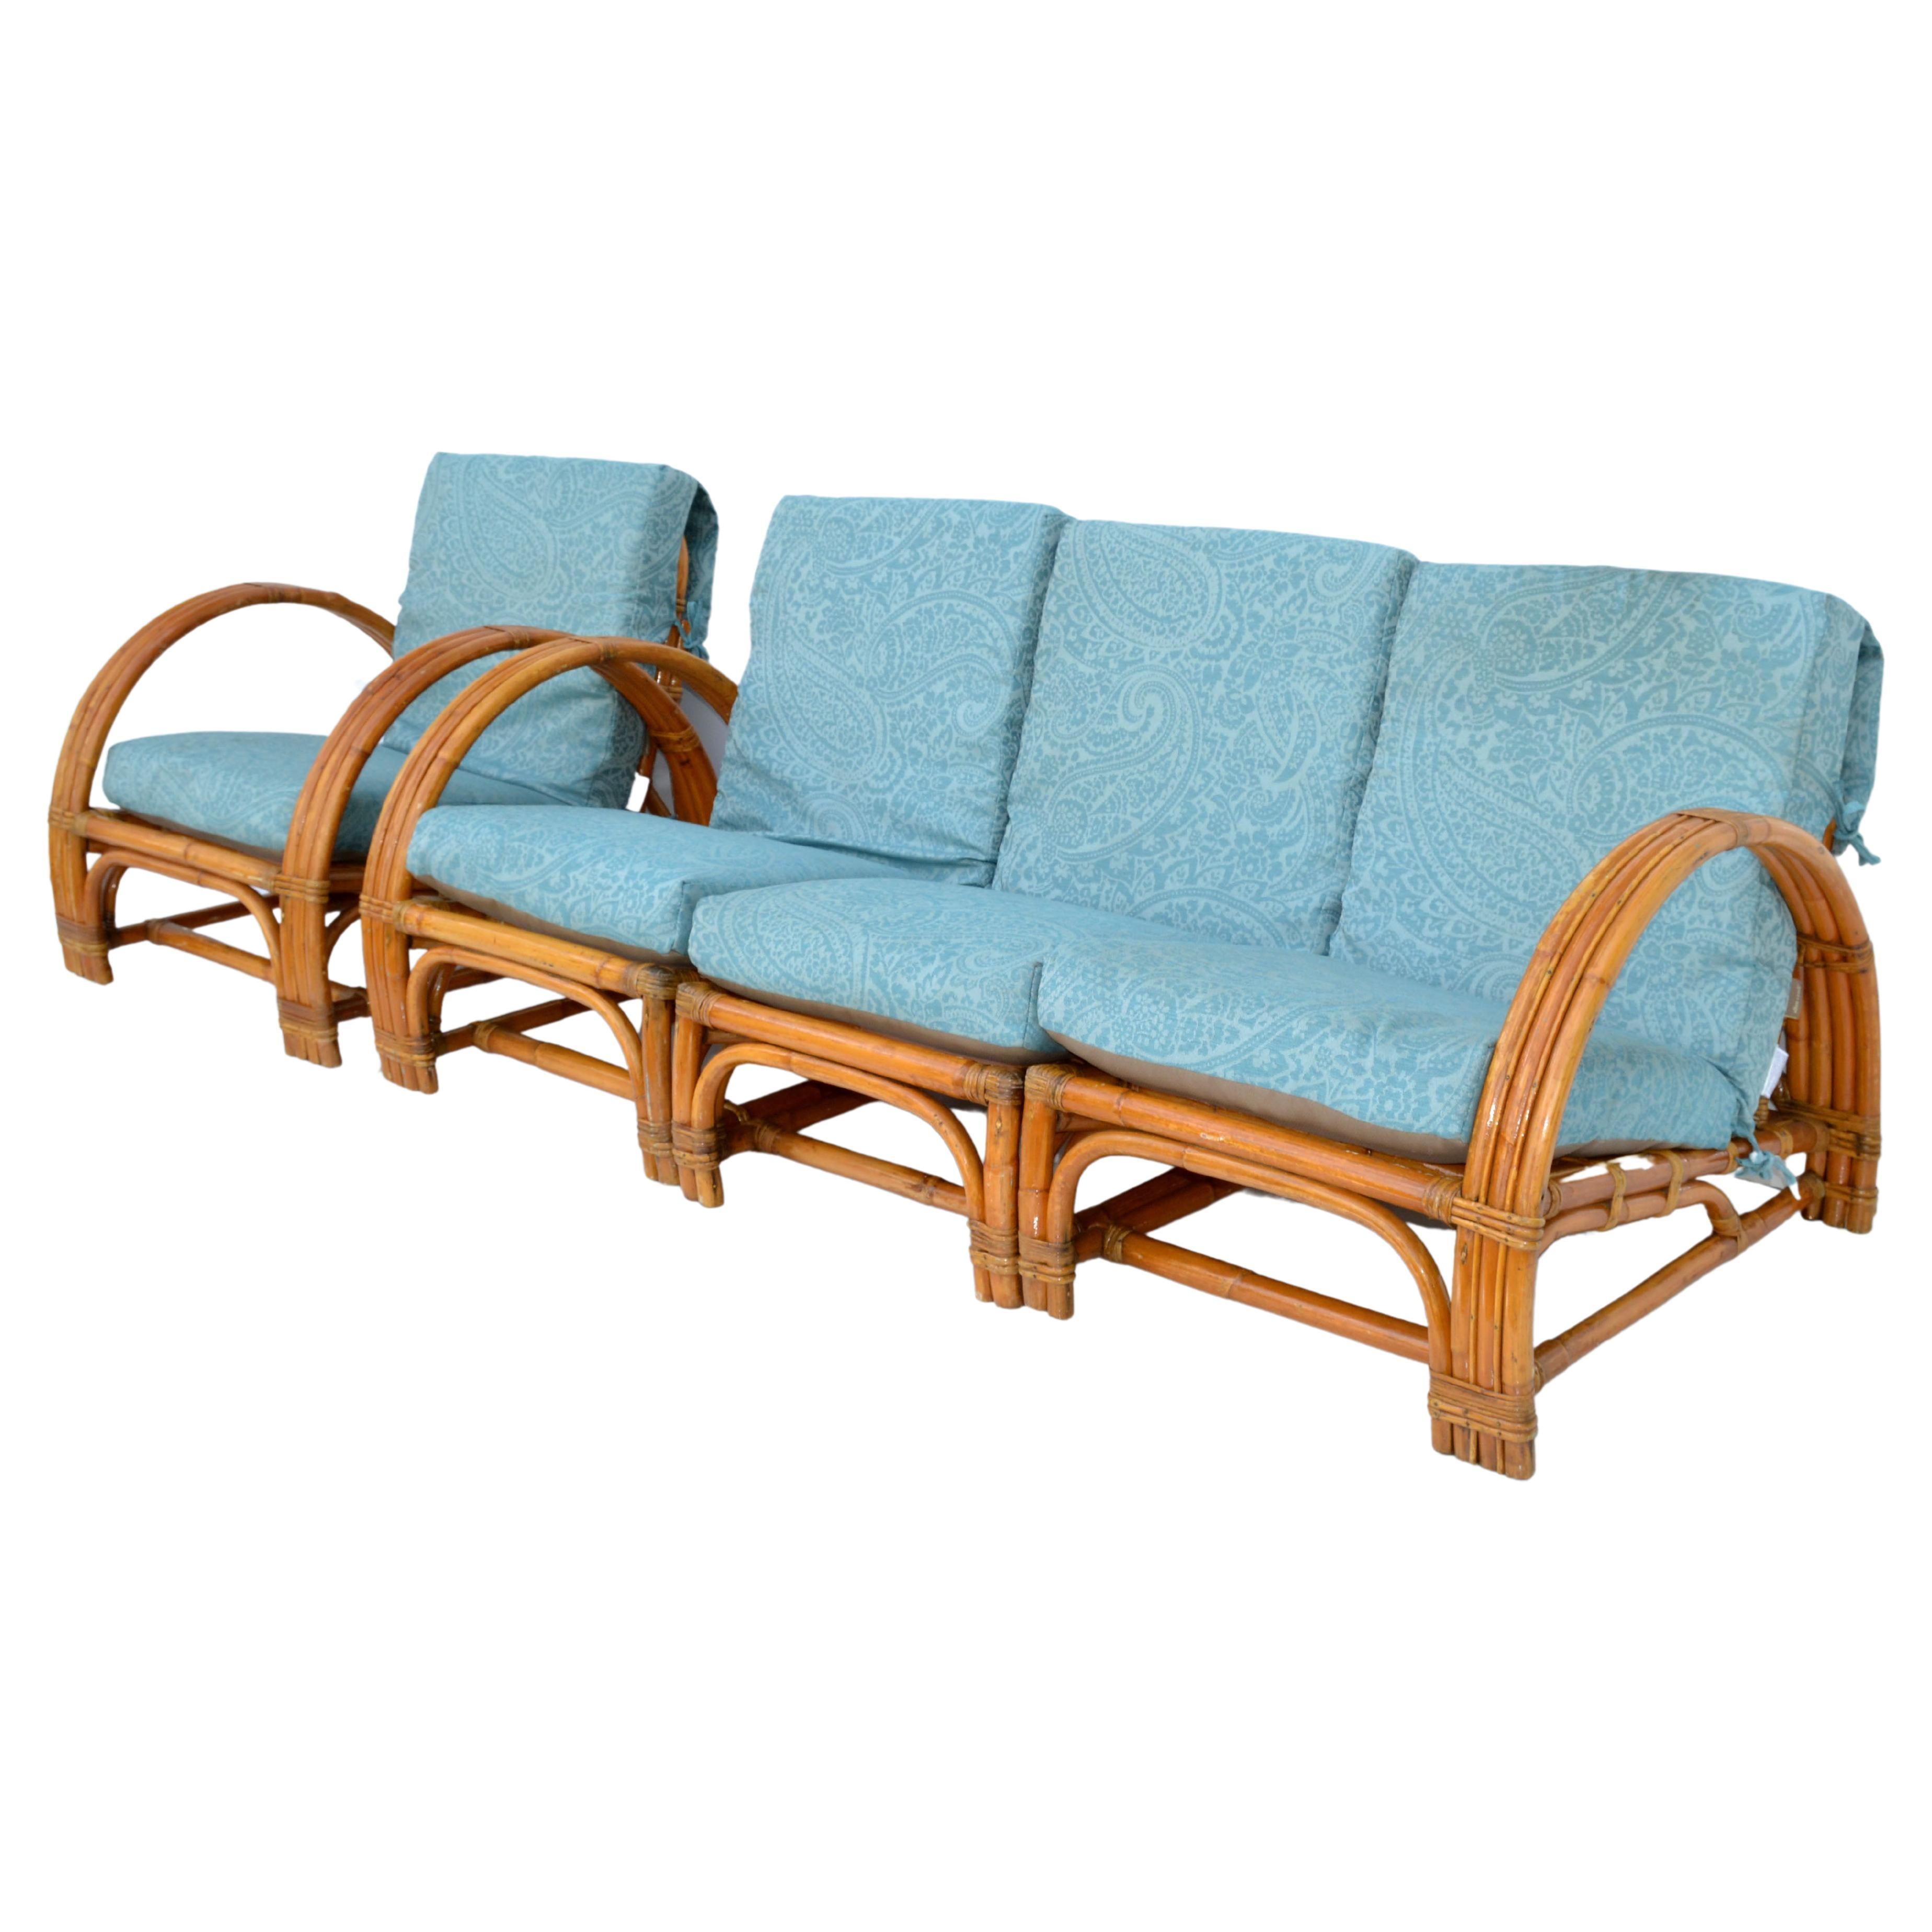 Calif Asia 4 Piece Seating Set Bamboo Sofa & Lounge Chair Turquoise Upholstery